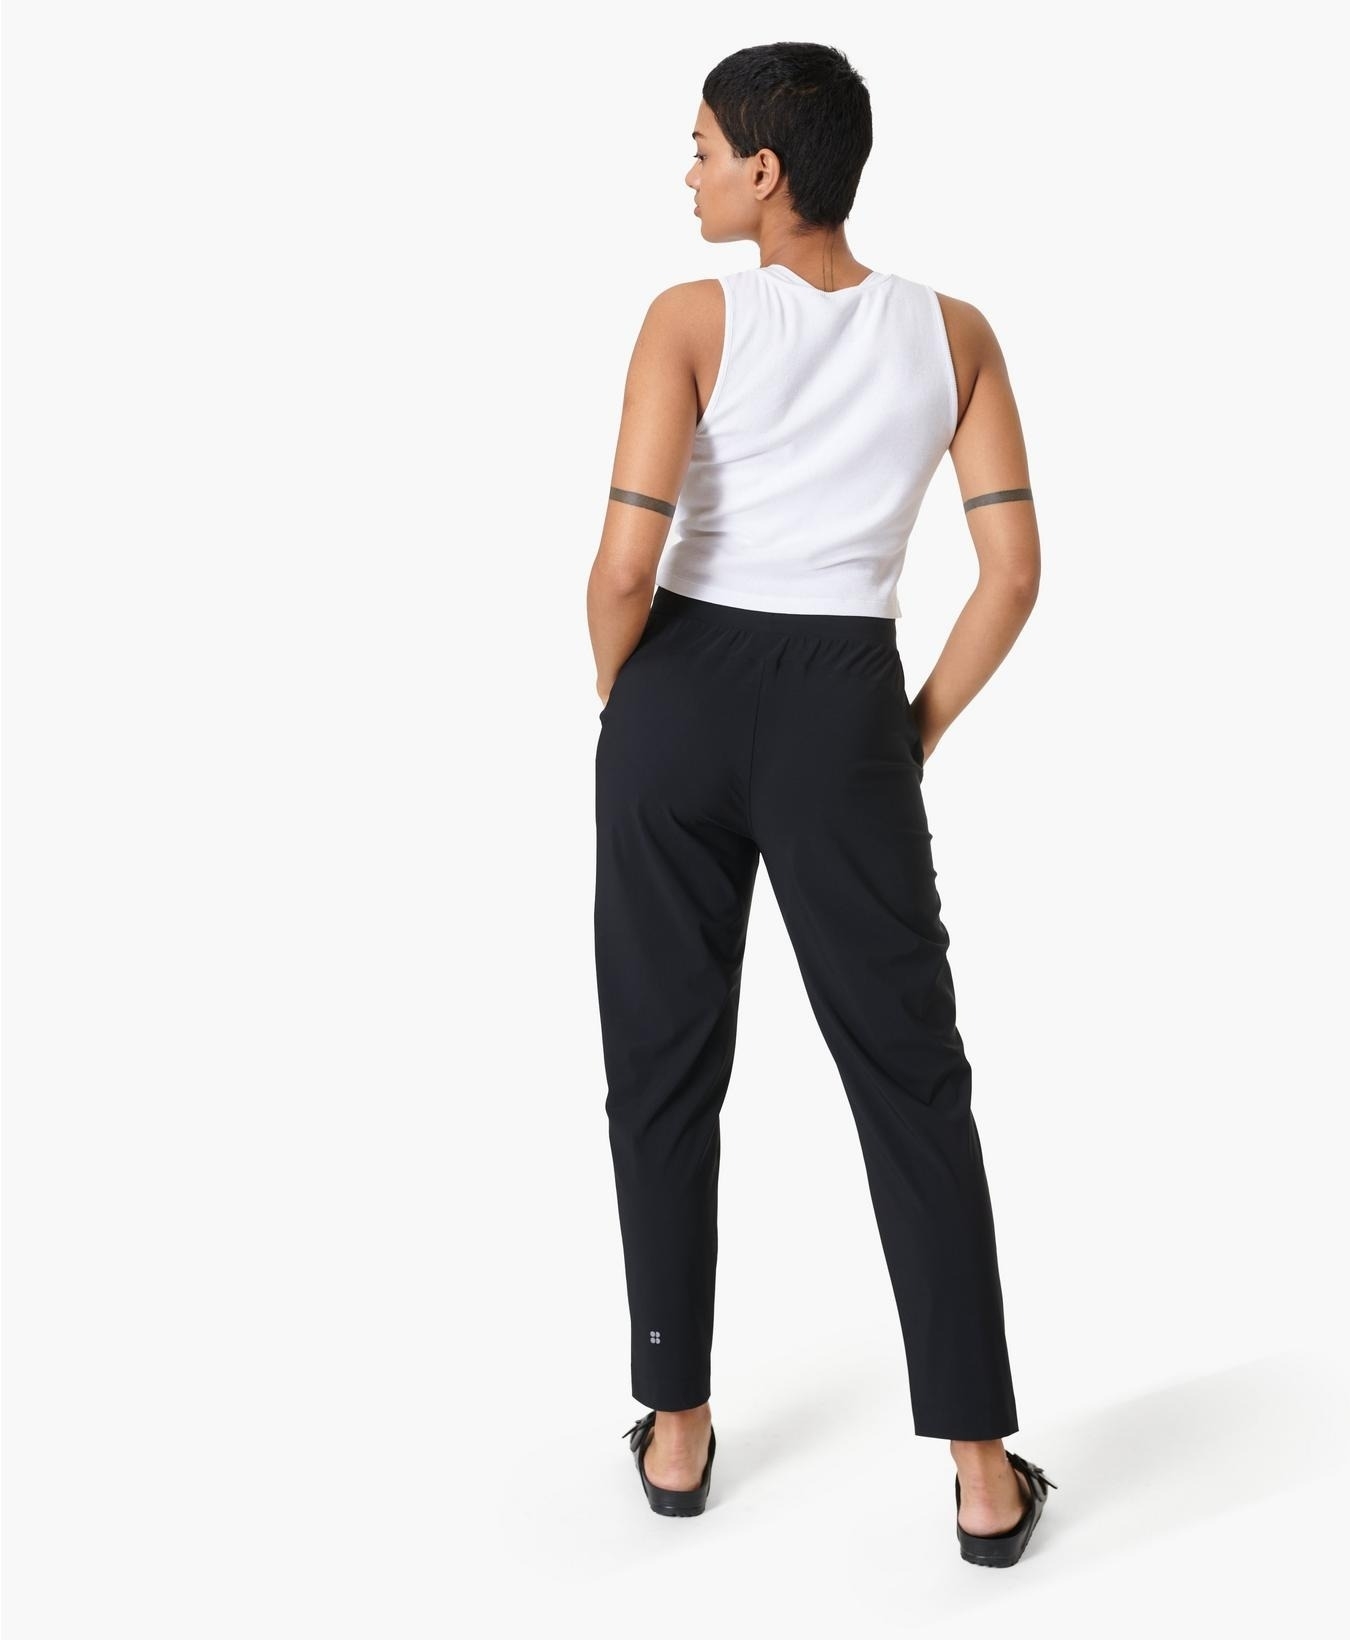 These Comfy Gym-To-Office Pants Can Get You Through Your Entire Day